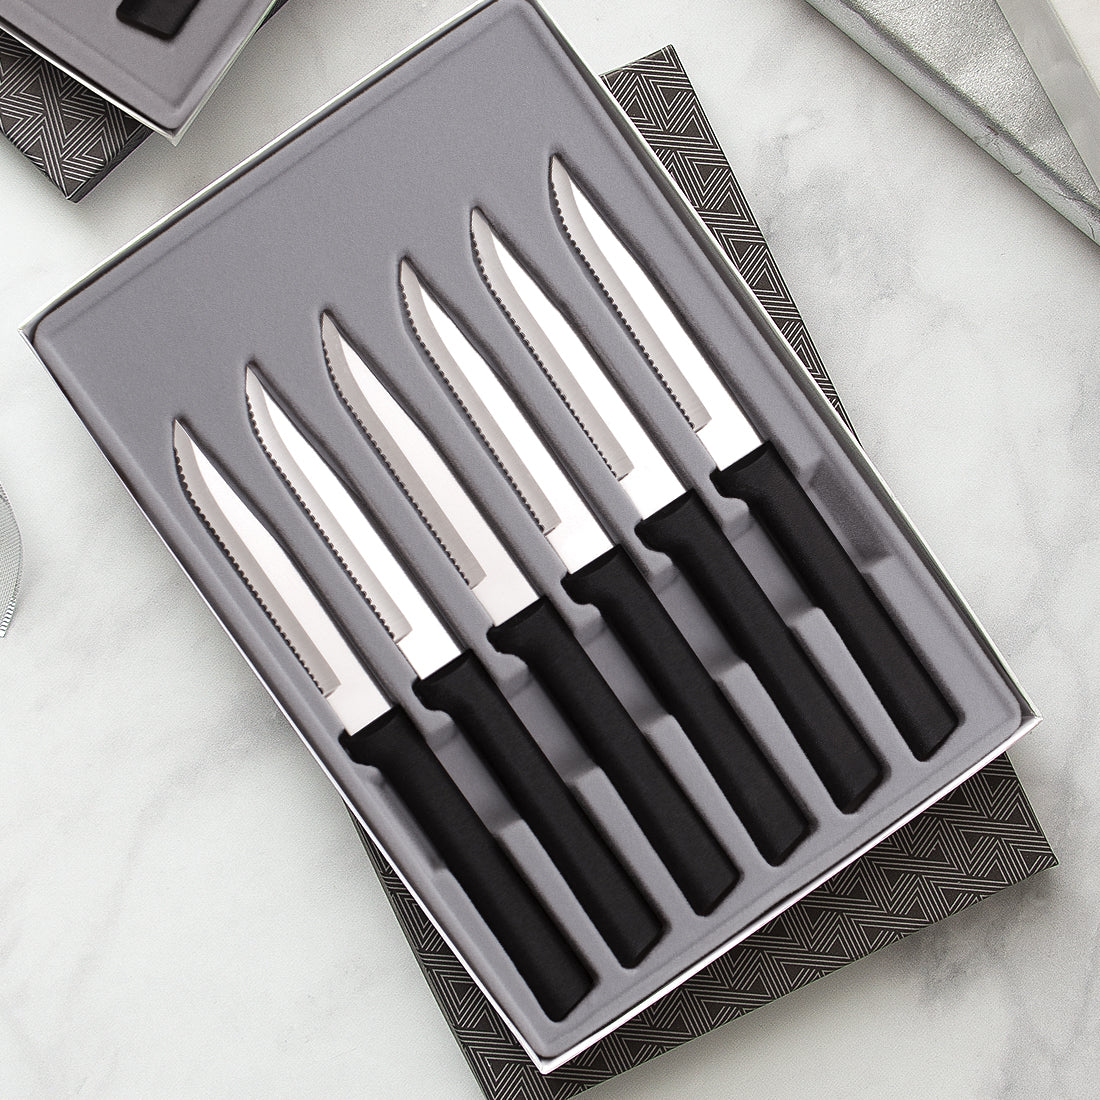 Lux Decor Collection Knives Set Stainless Steel - Serrated Kitchen